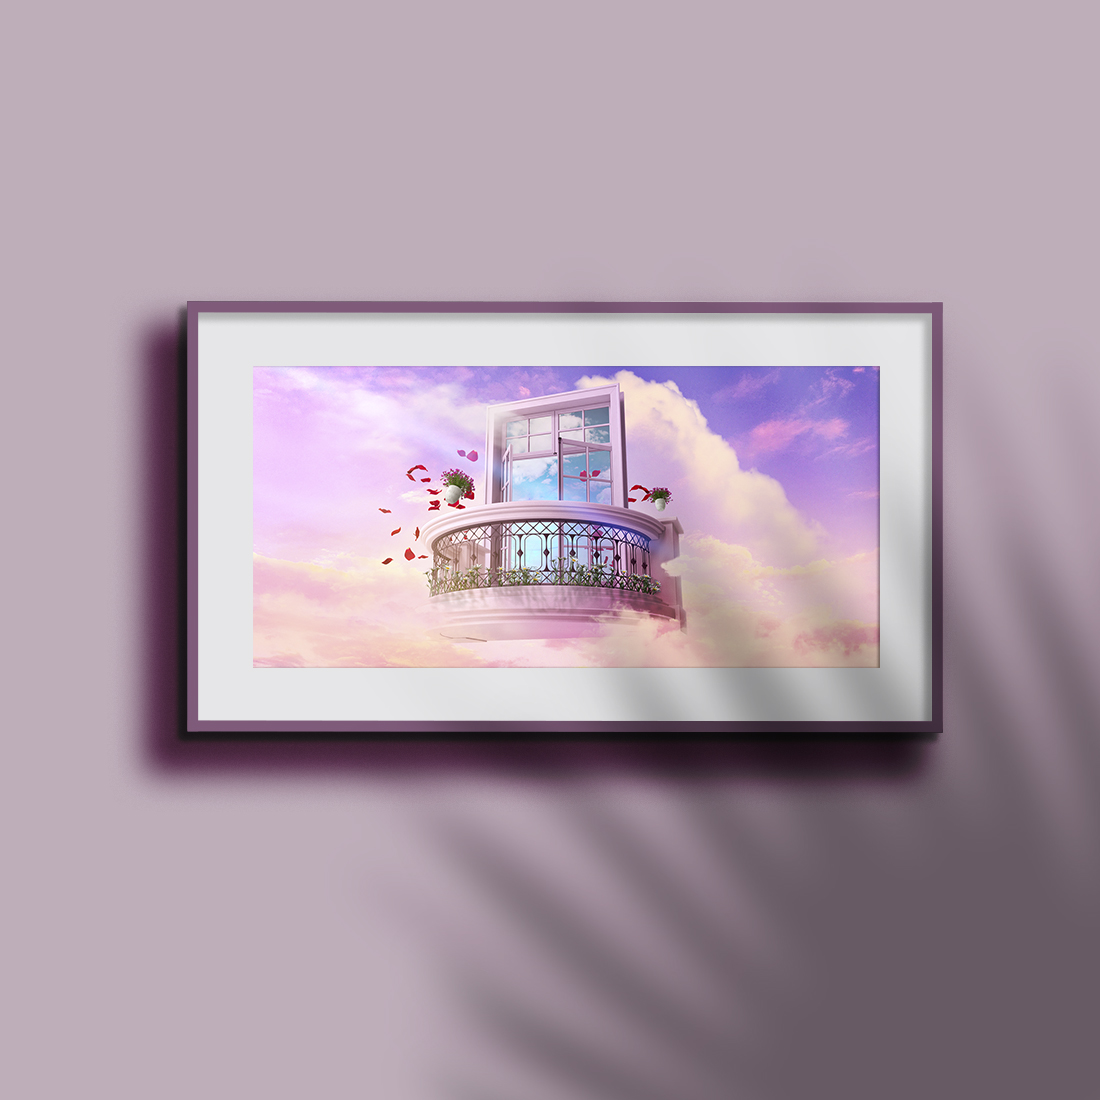 fly balcony in purple sky with red flower pinterest preview image.